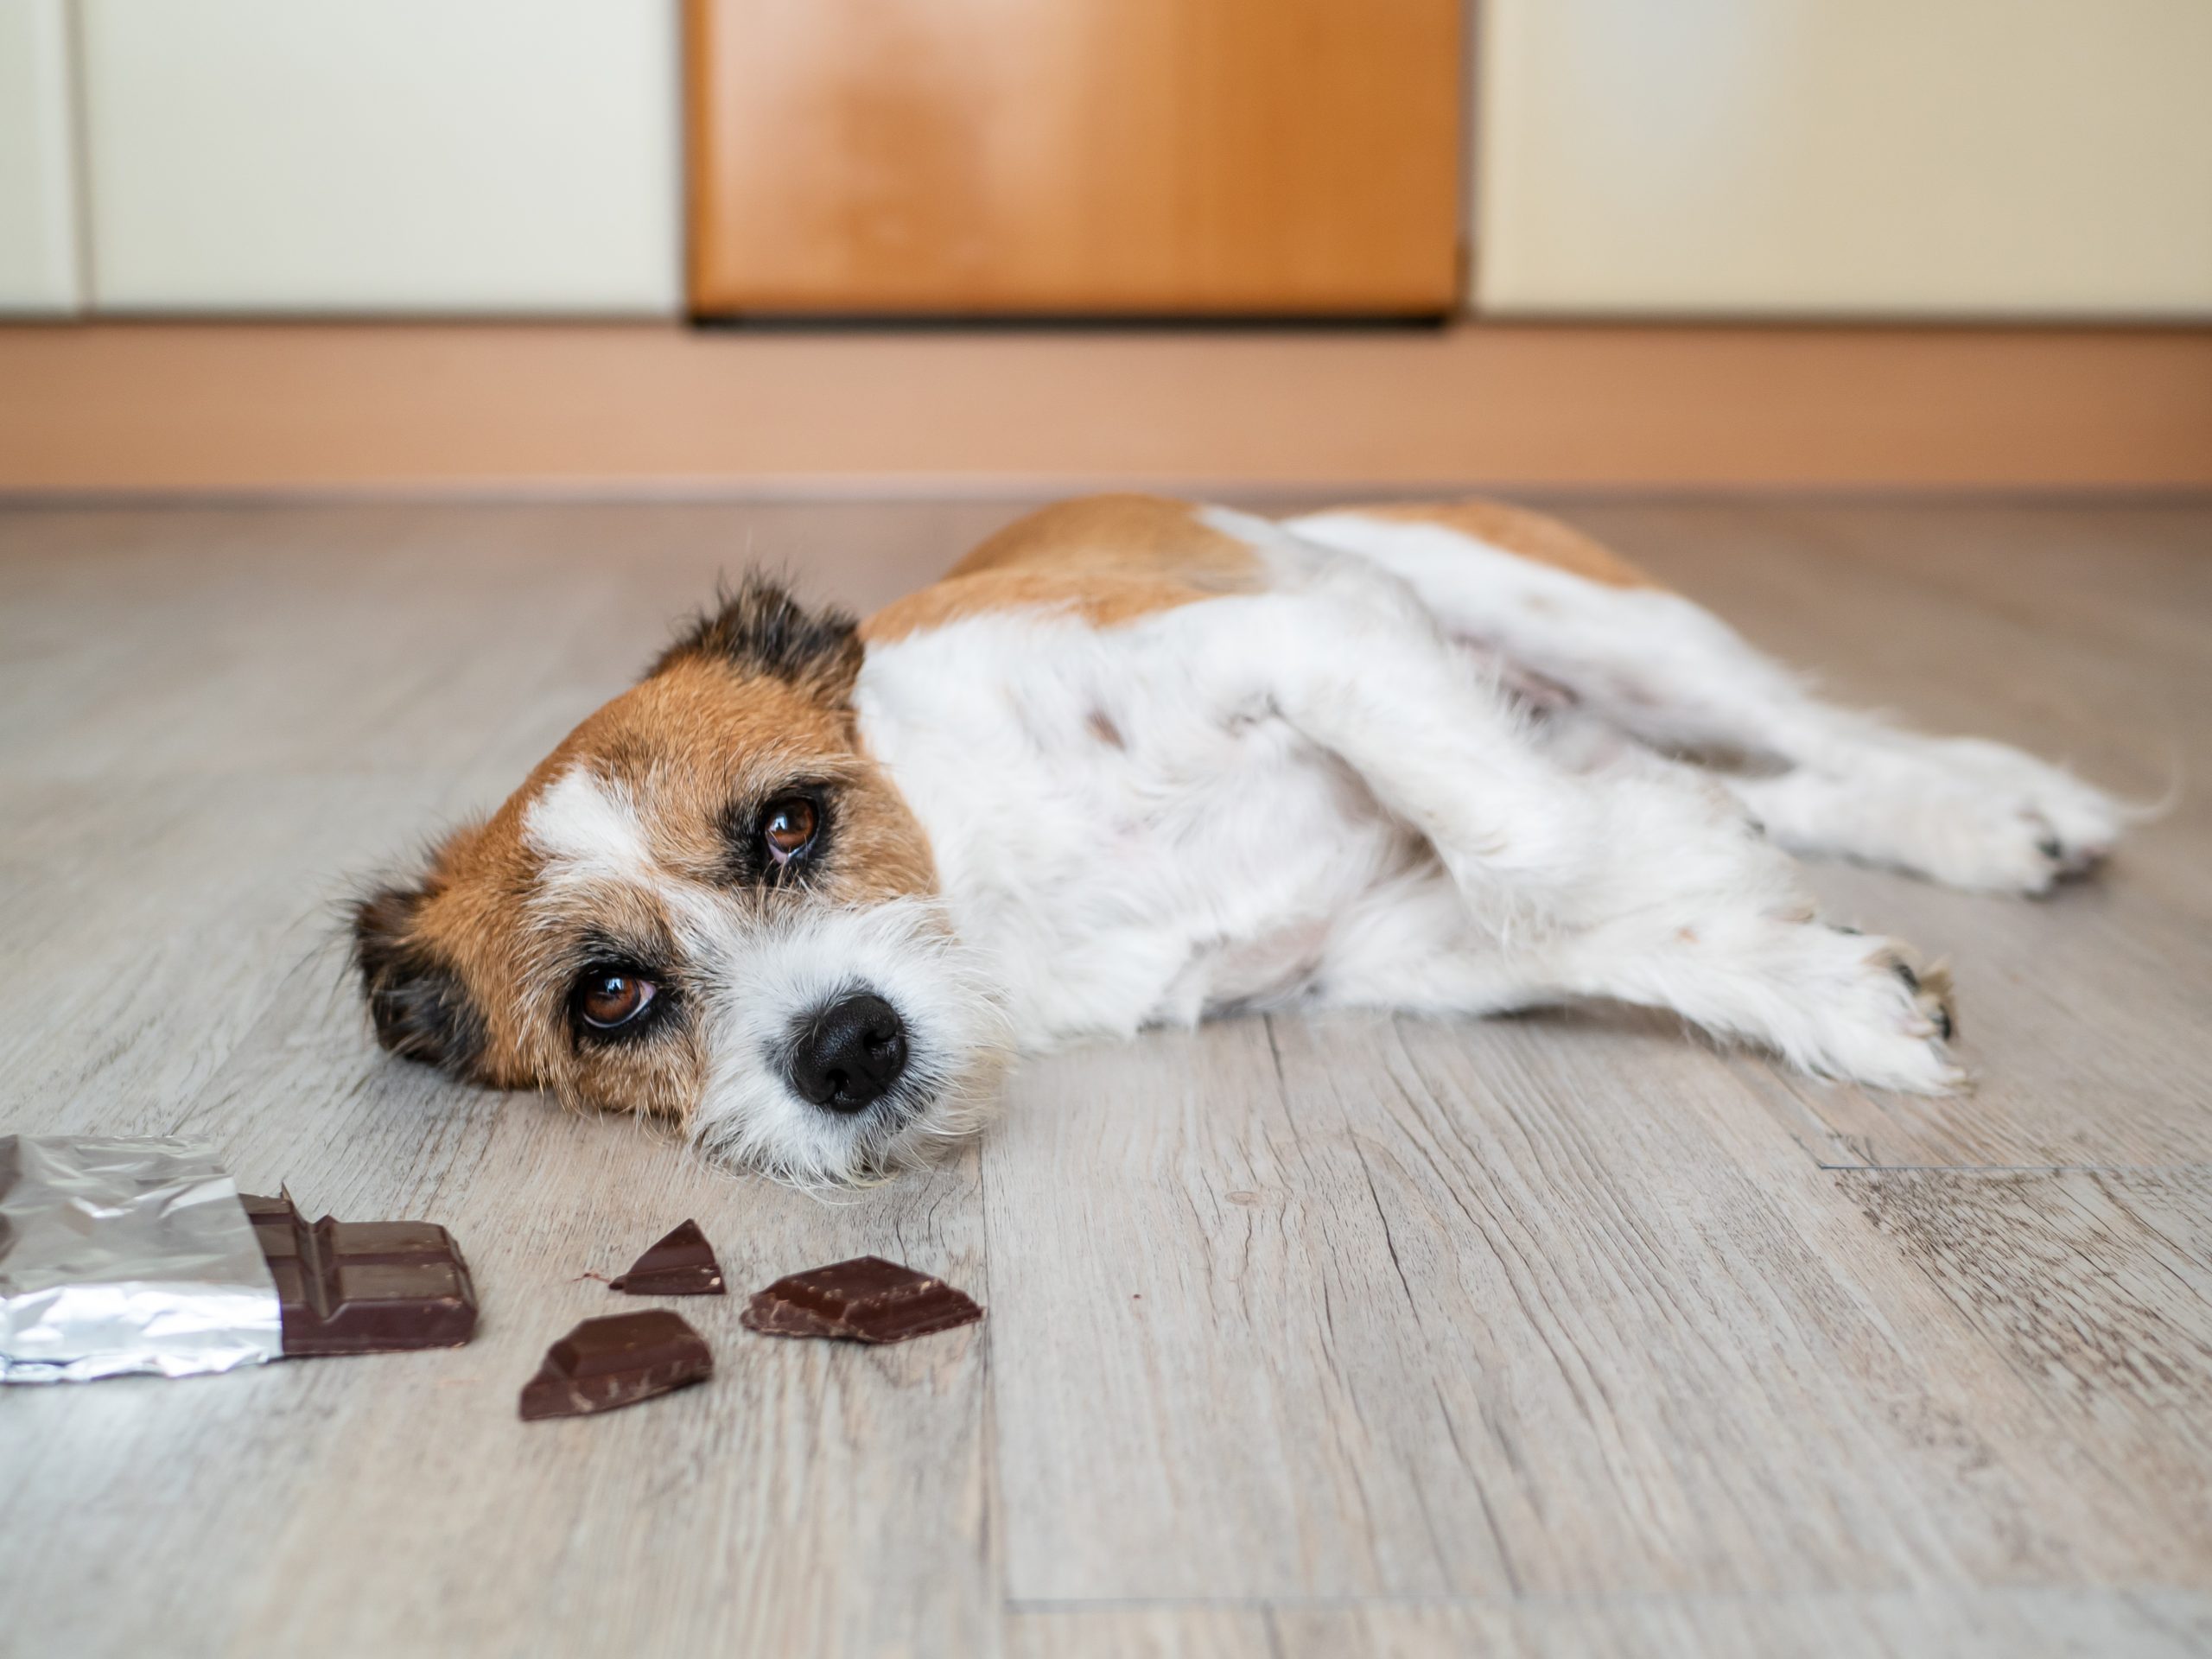 What are the symptoms of a dog that has eaten chocolate?